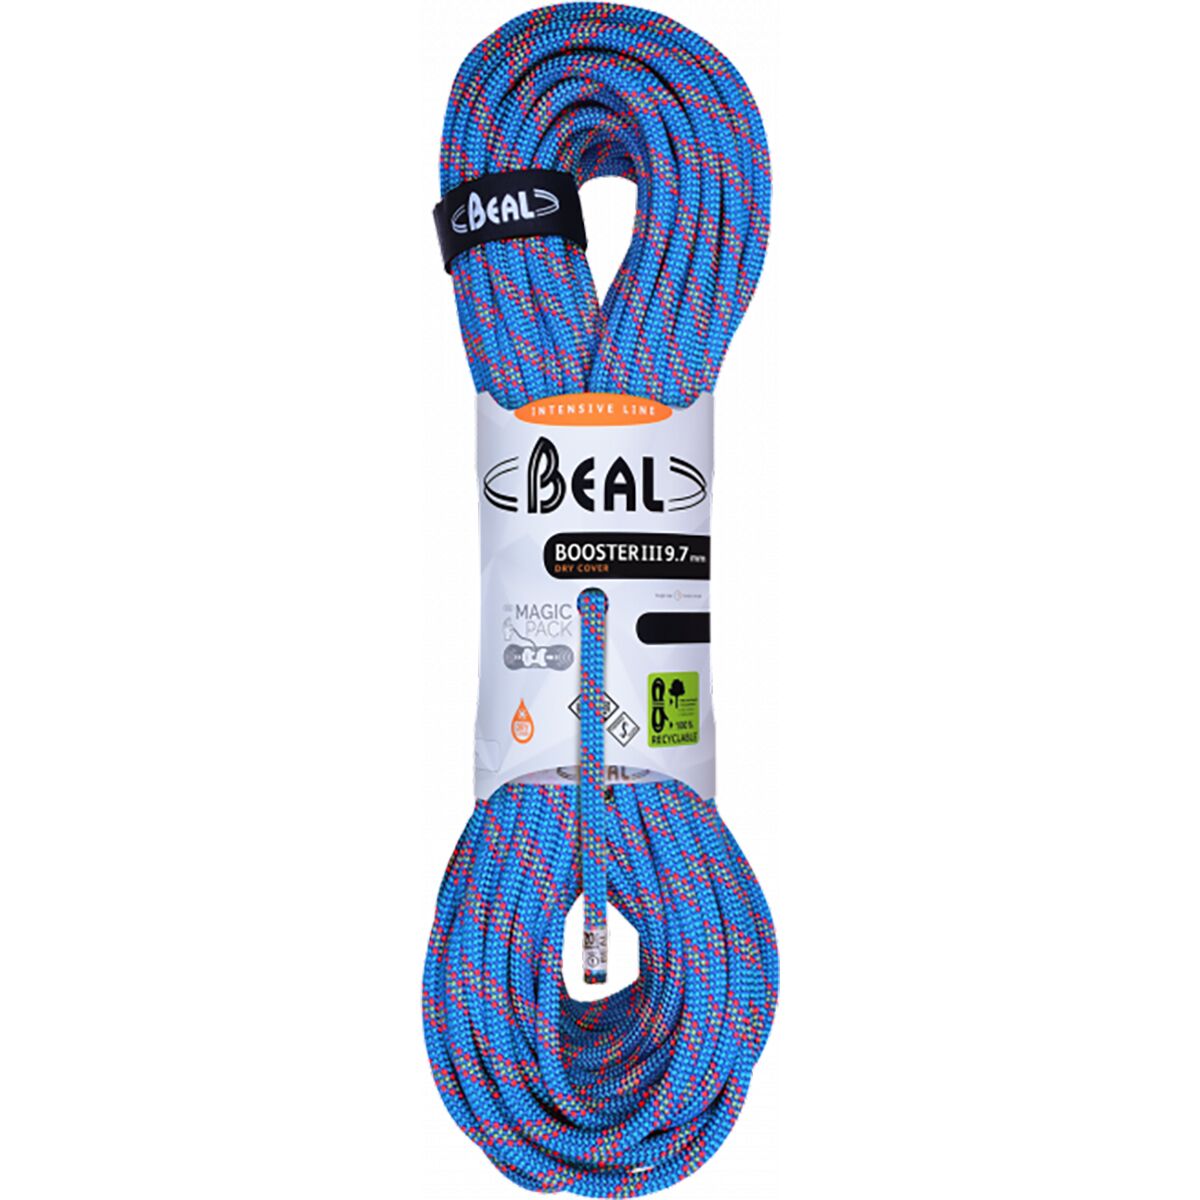 Beal Booster III Dry Cover Climbing Rope - 9.7mm